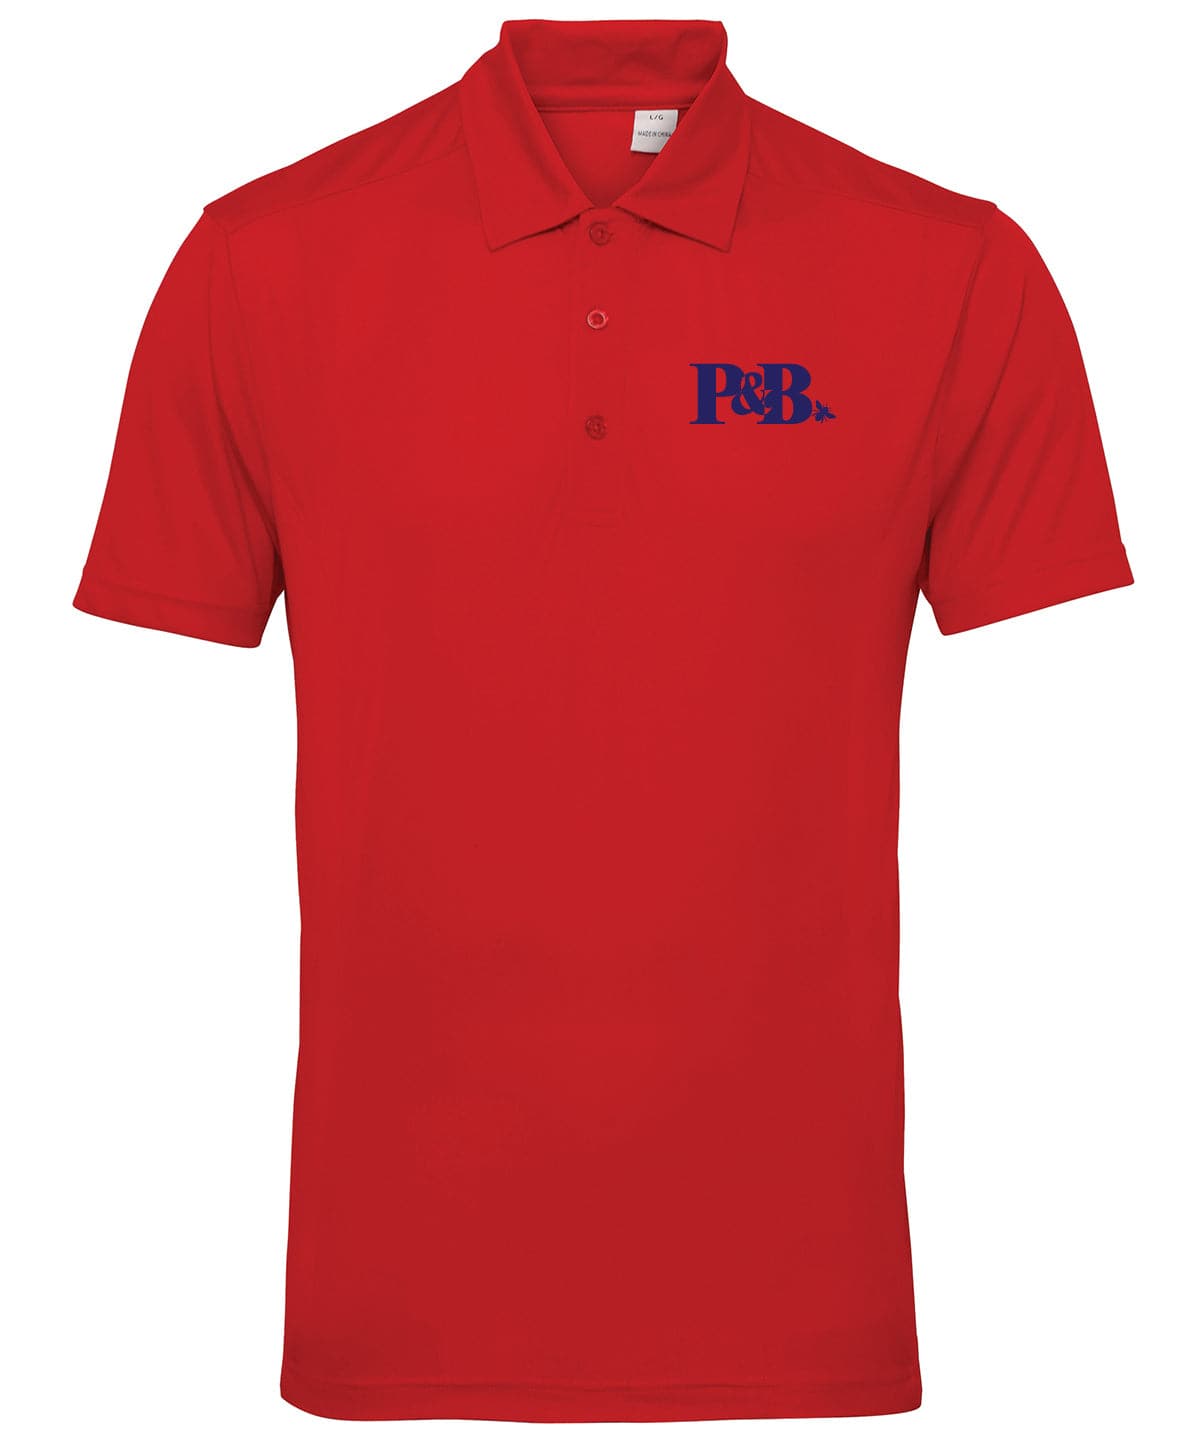 CHARLIE - Men's Technical Smooth Polo